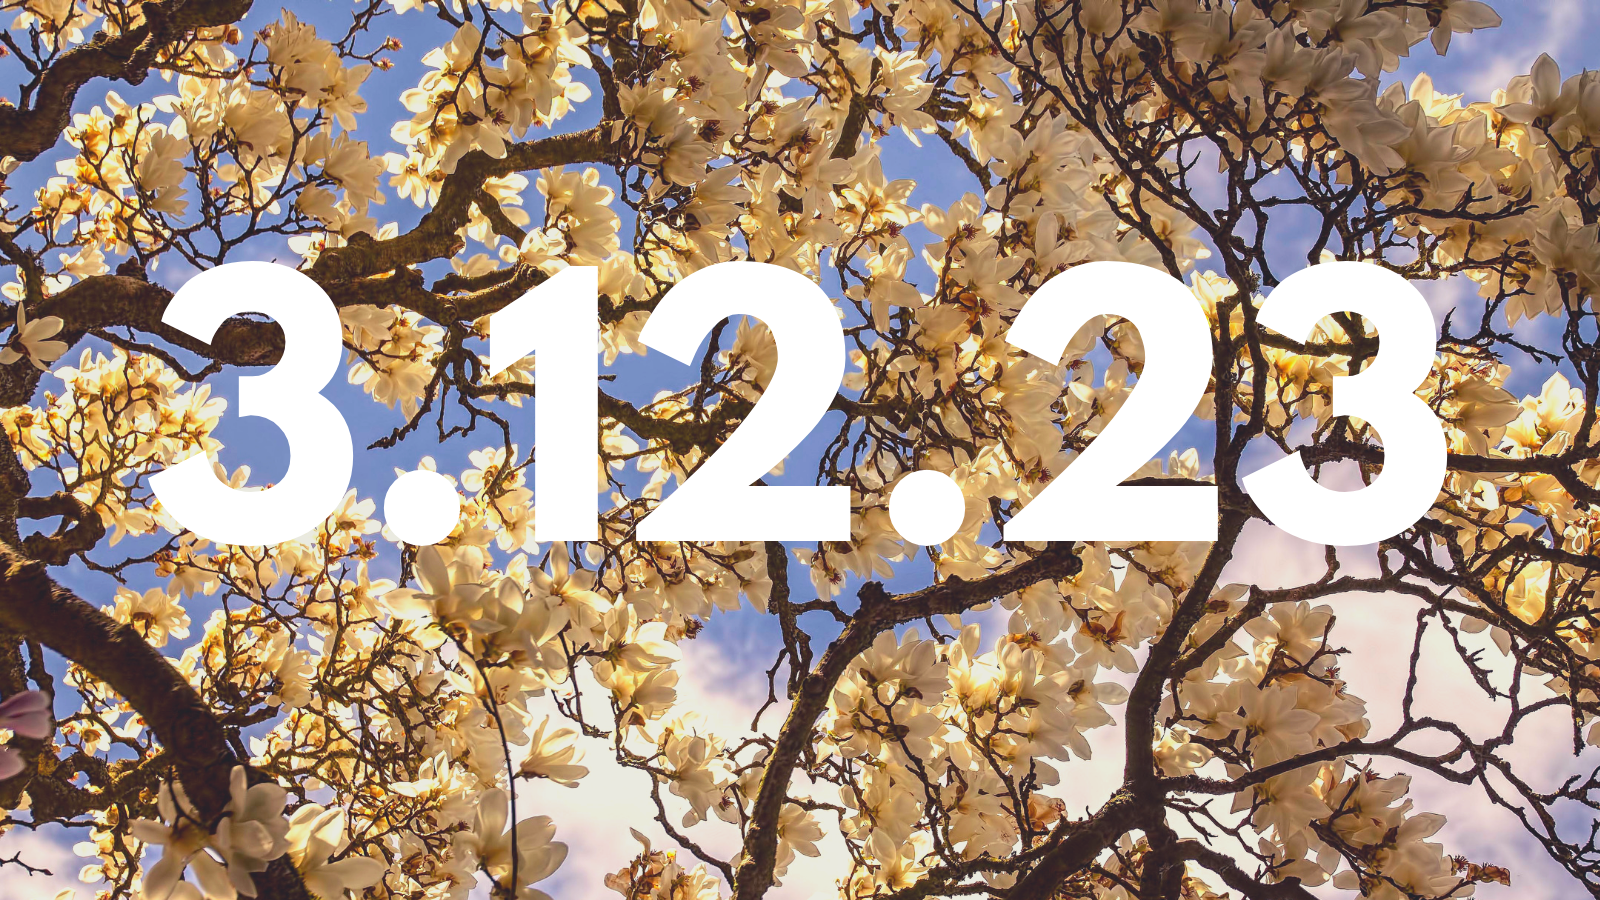 Featured image for “3.12.23”